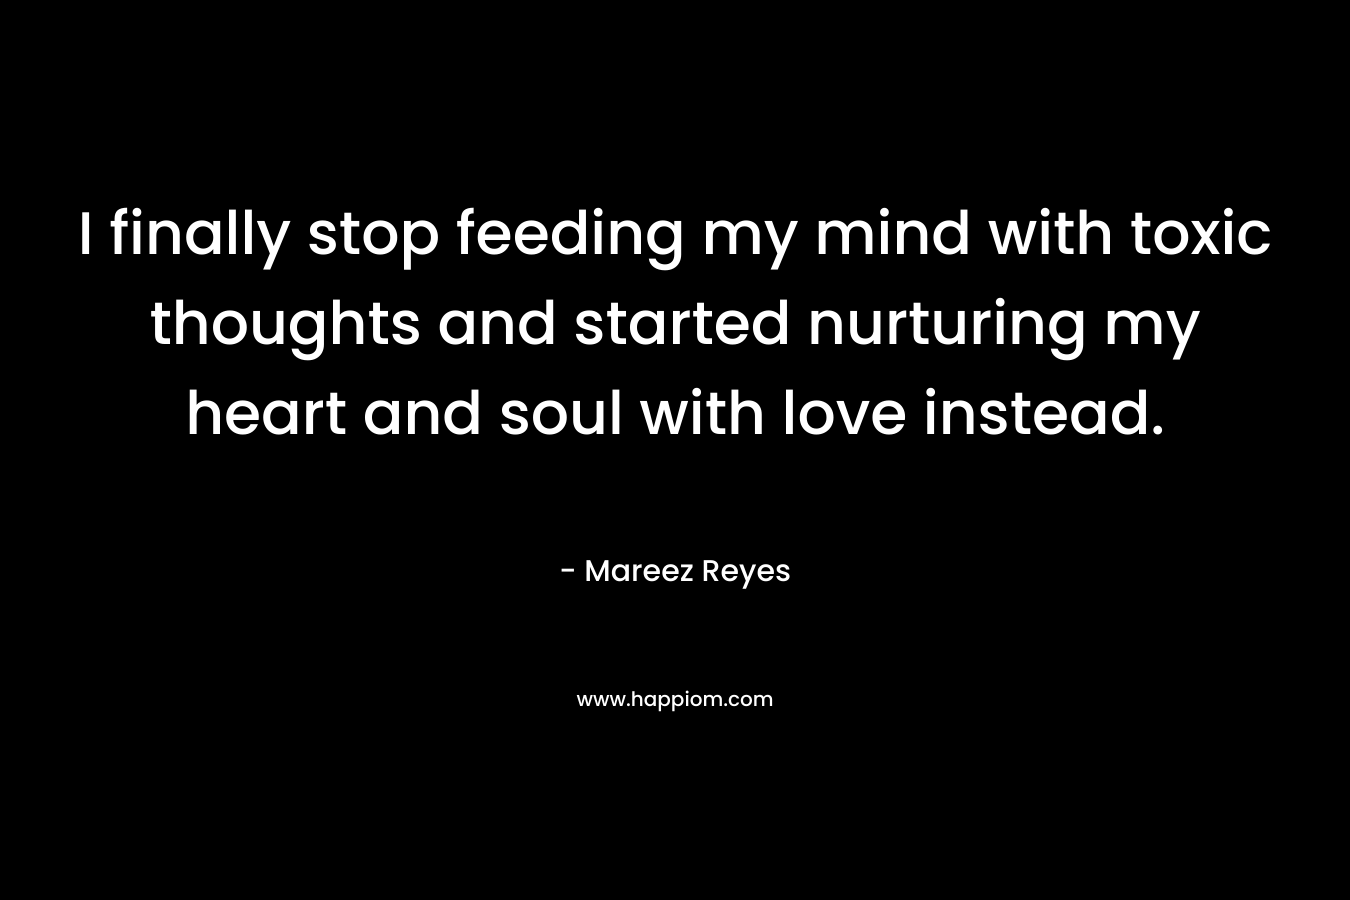 I finally stop feeding my mind with toxic thoughts and started nurturing my heart and soul with love instead. – Mareez Reyes